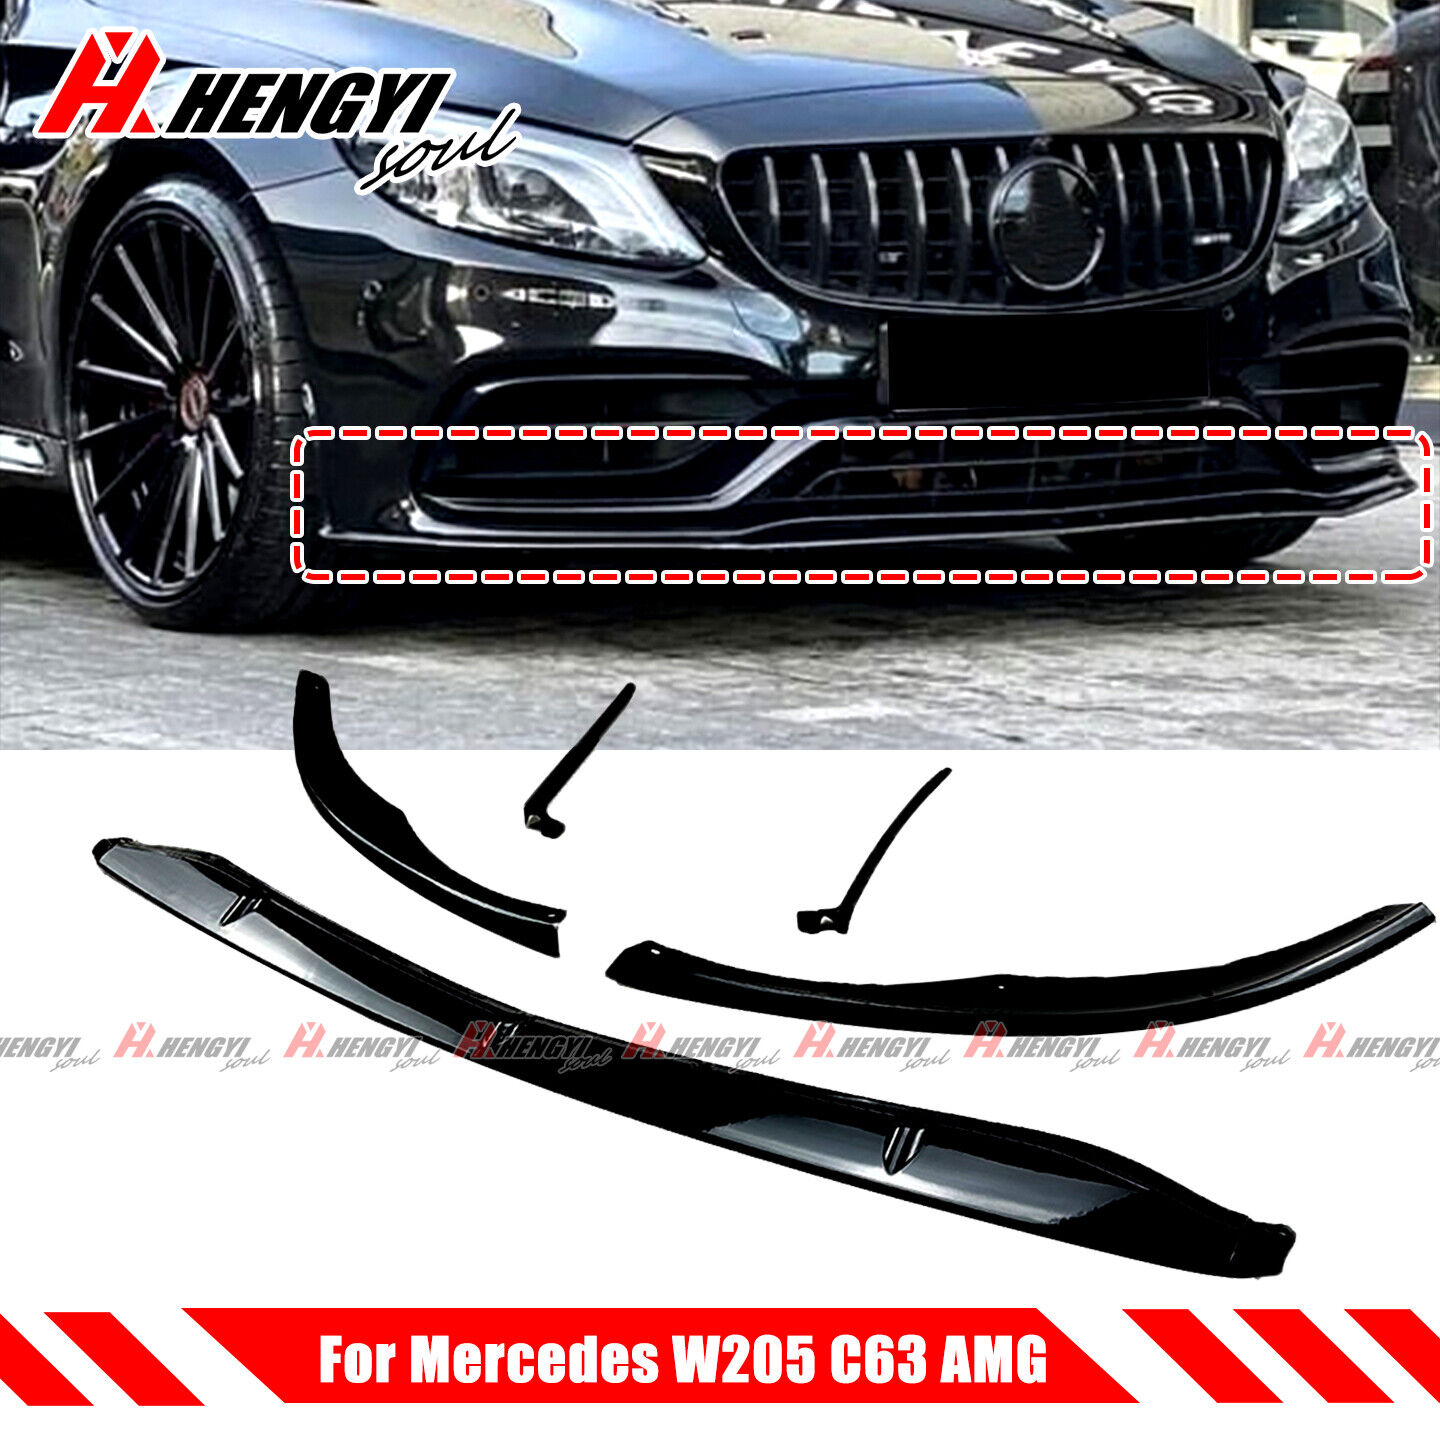 FOR 15-21 MERCEDES BENZ W205 C63 AMG EDITION 1 STYLE FRONT BUMPER LIP GLOSS BLK